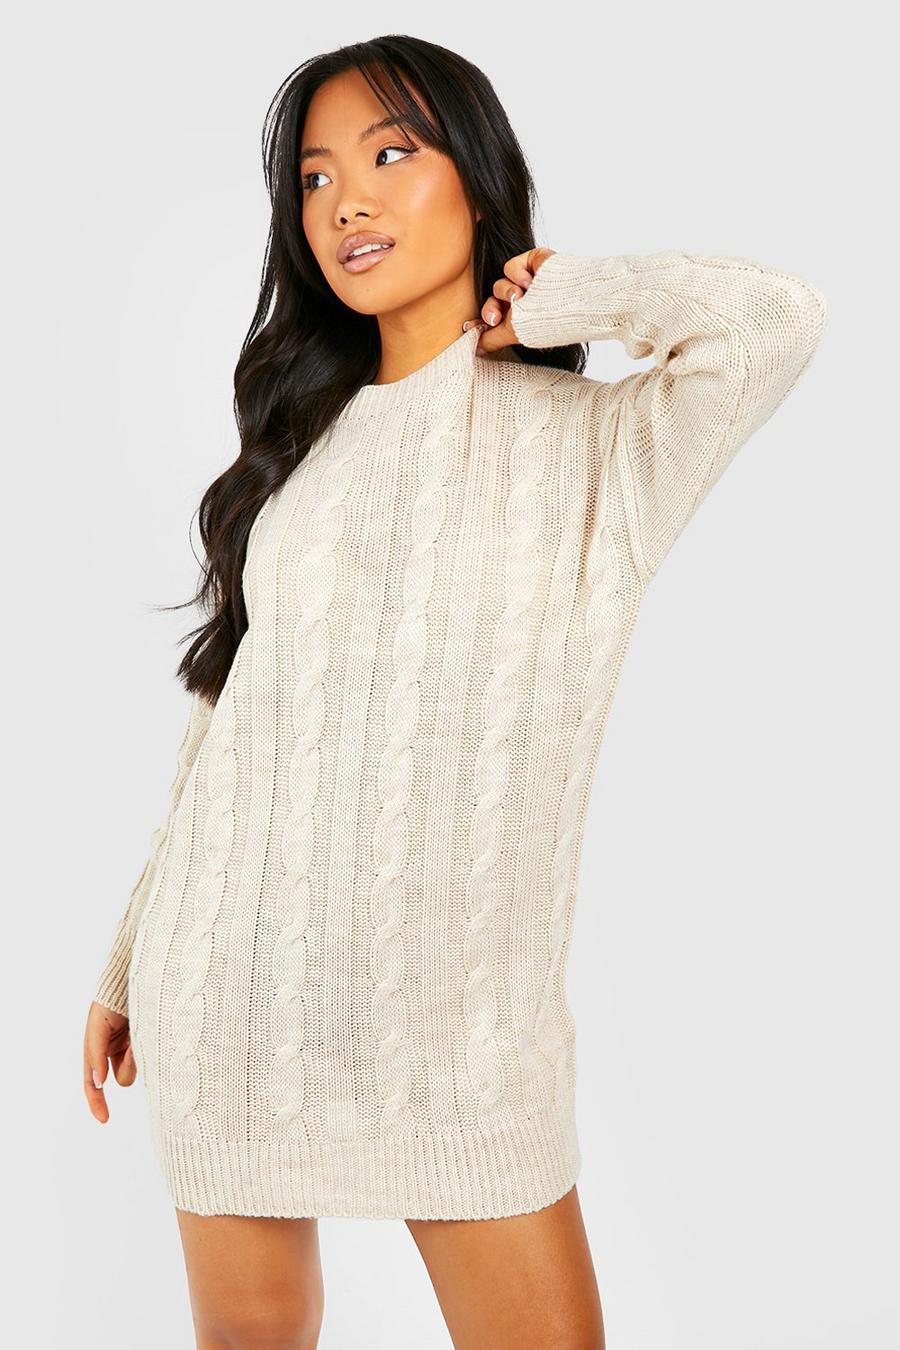 Oatmeal beige Petite Round Neck Cable Knit Sweater Dress